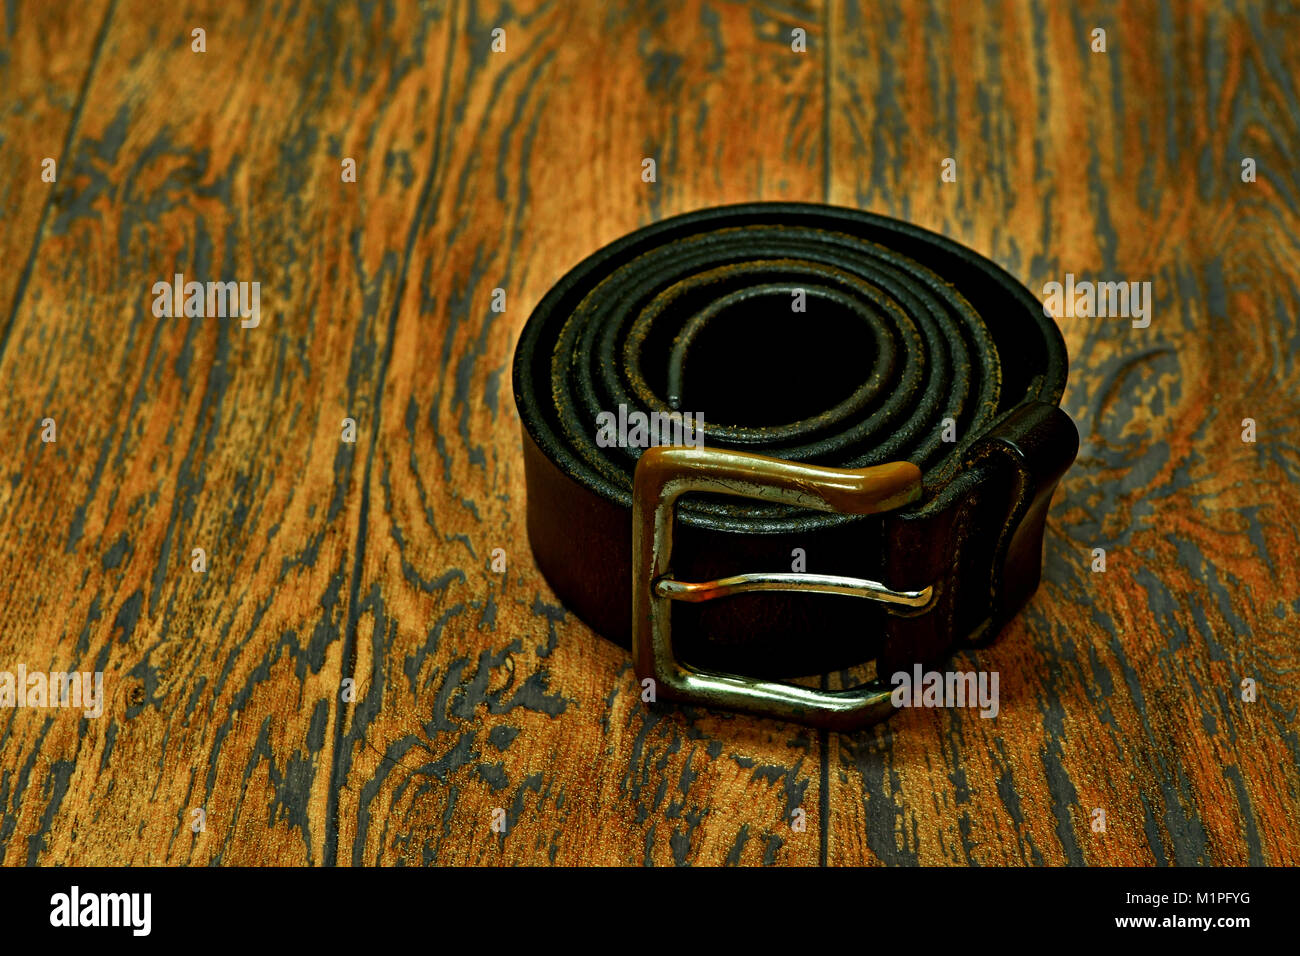 men's leather belt sport style and men's necktie by Gucci and wooden floor Stock Photo